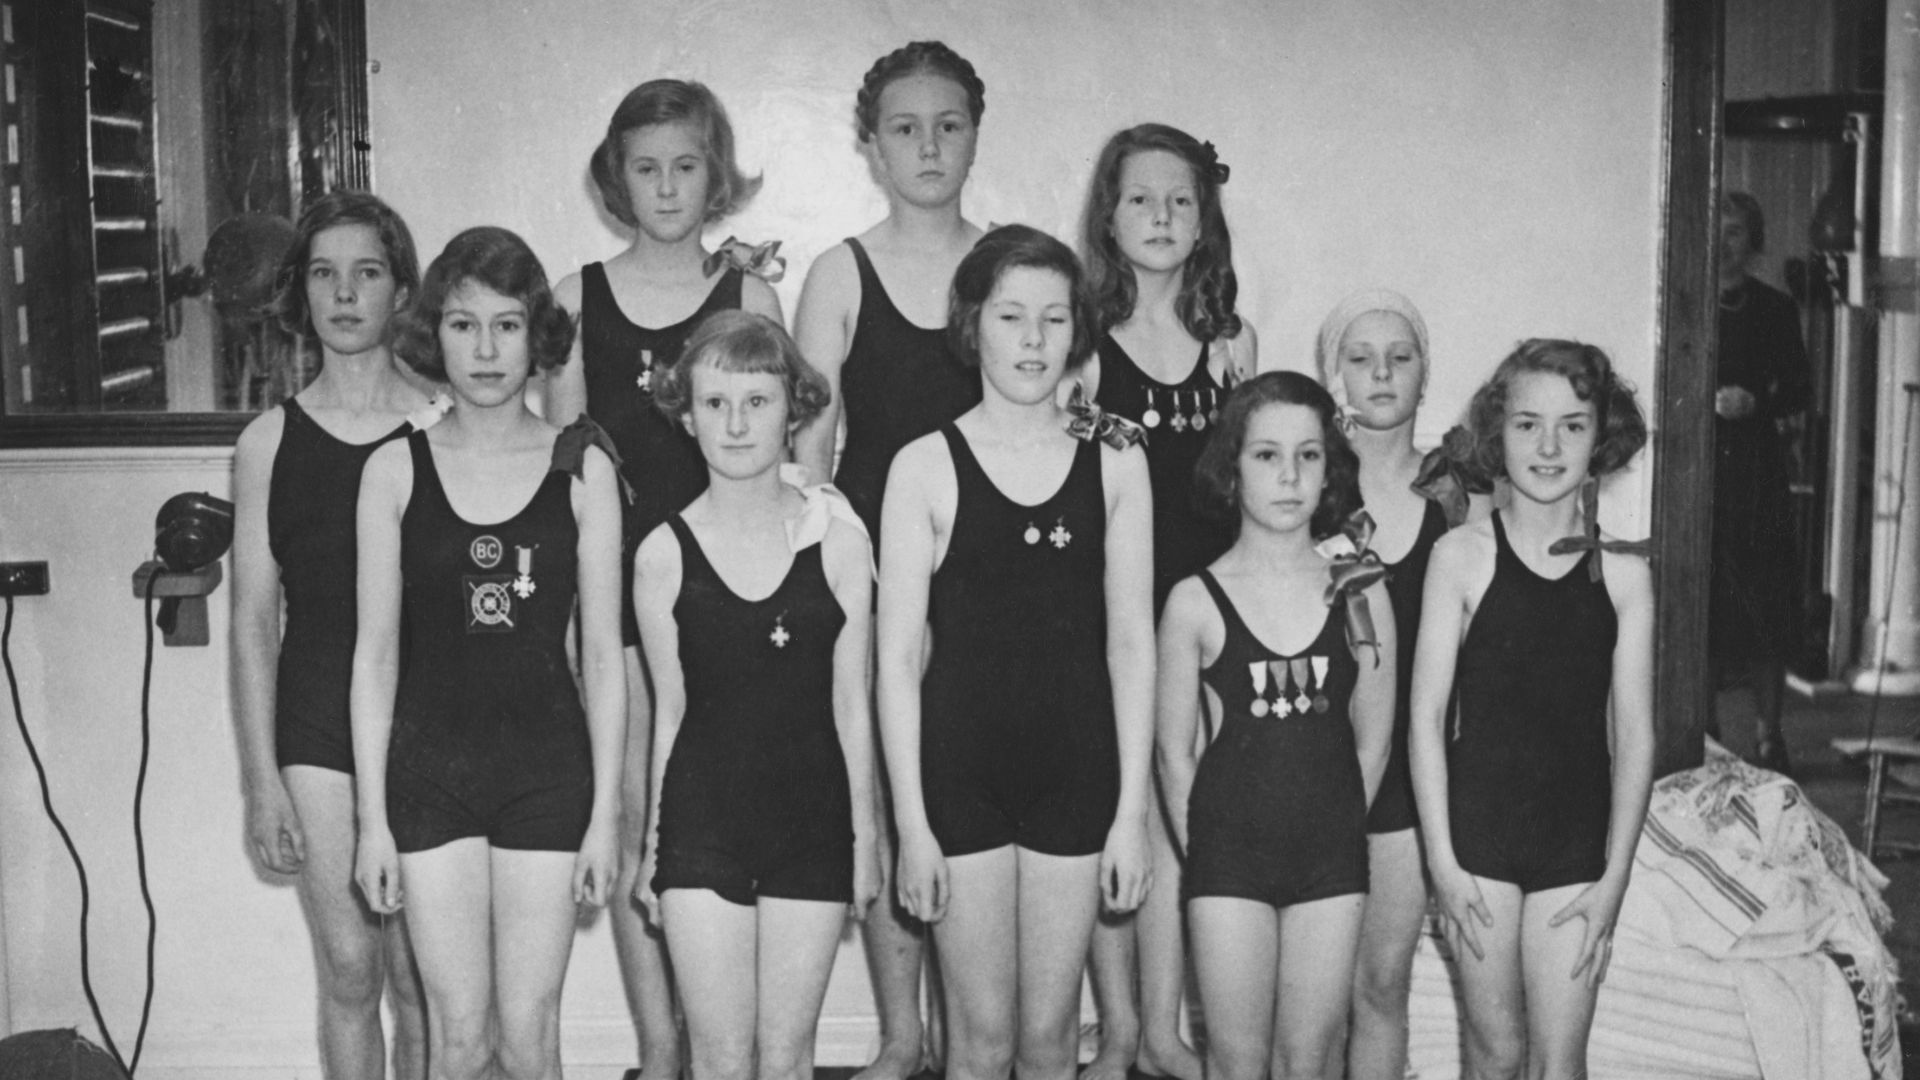 The Queen (front-left) with a group of young girls on a swimming team